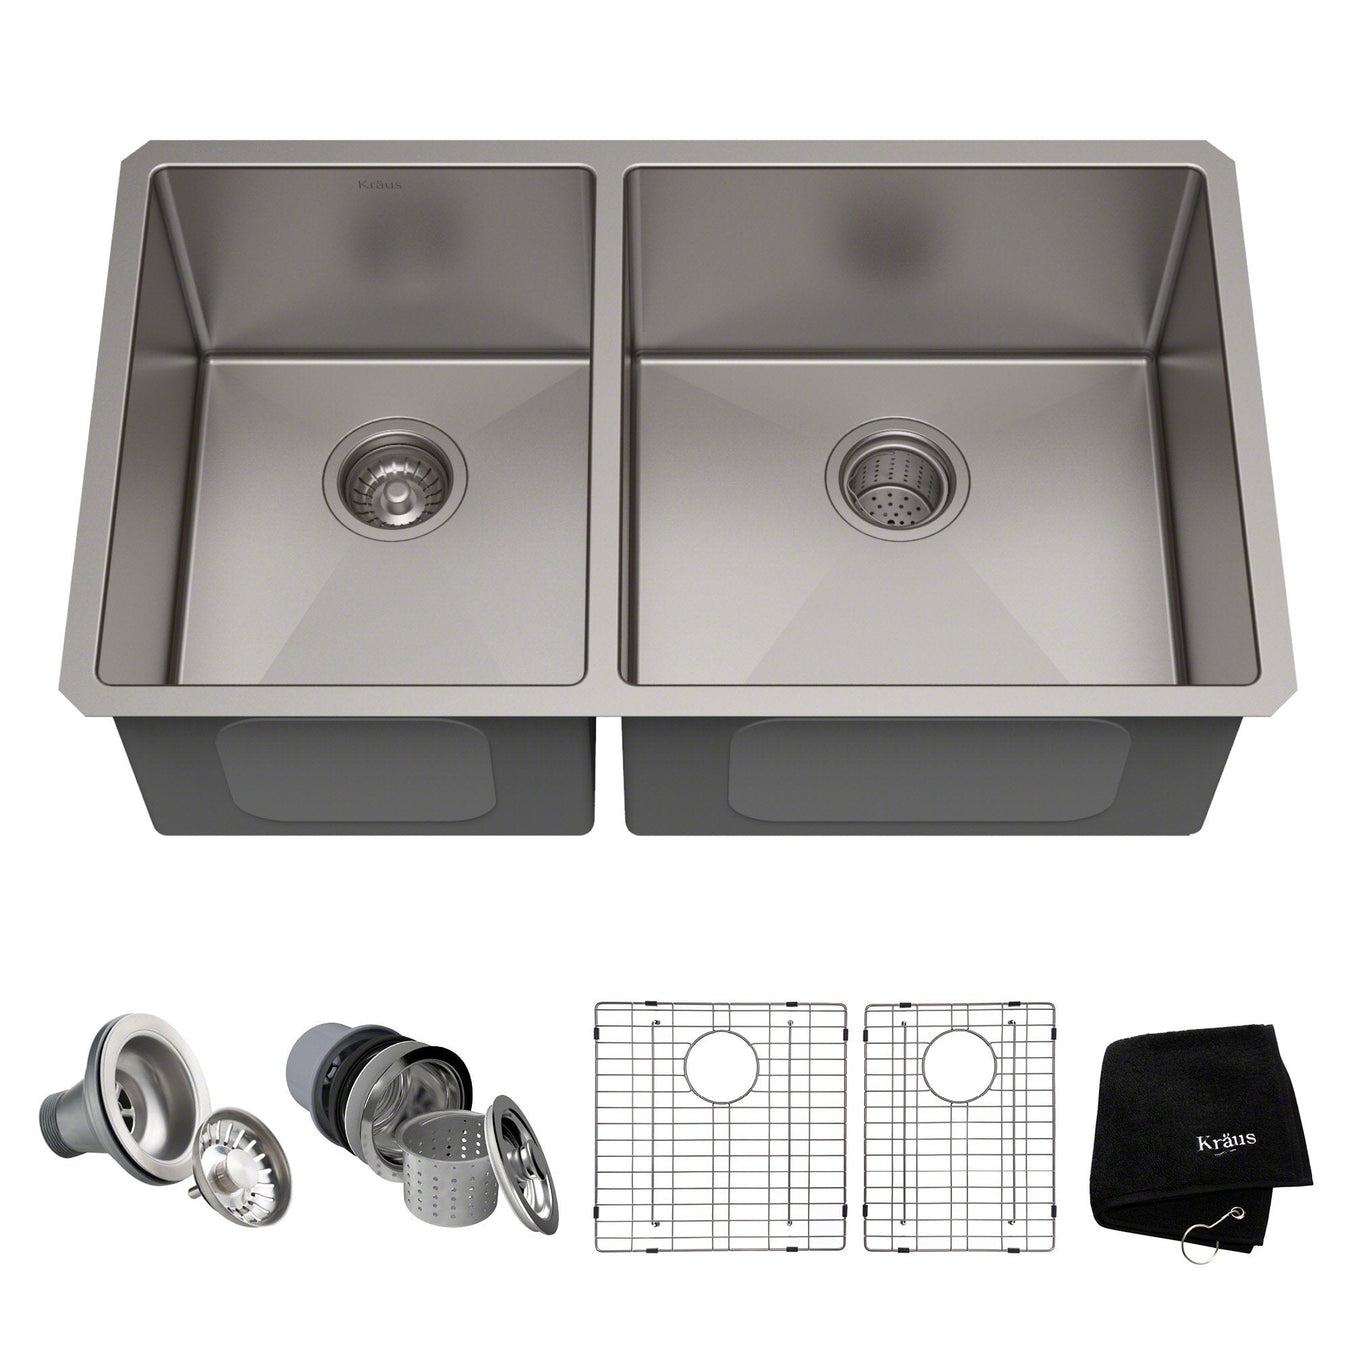 Double Bowl Kitchen Sinks For Sale